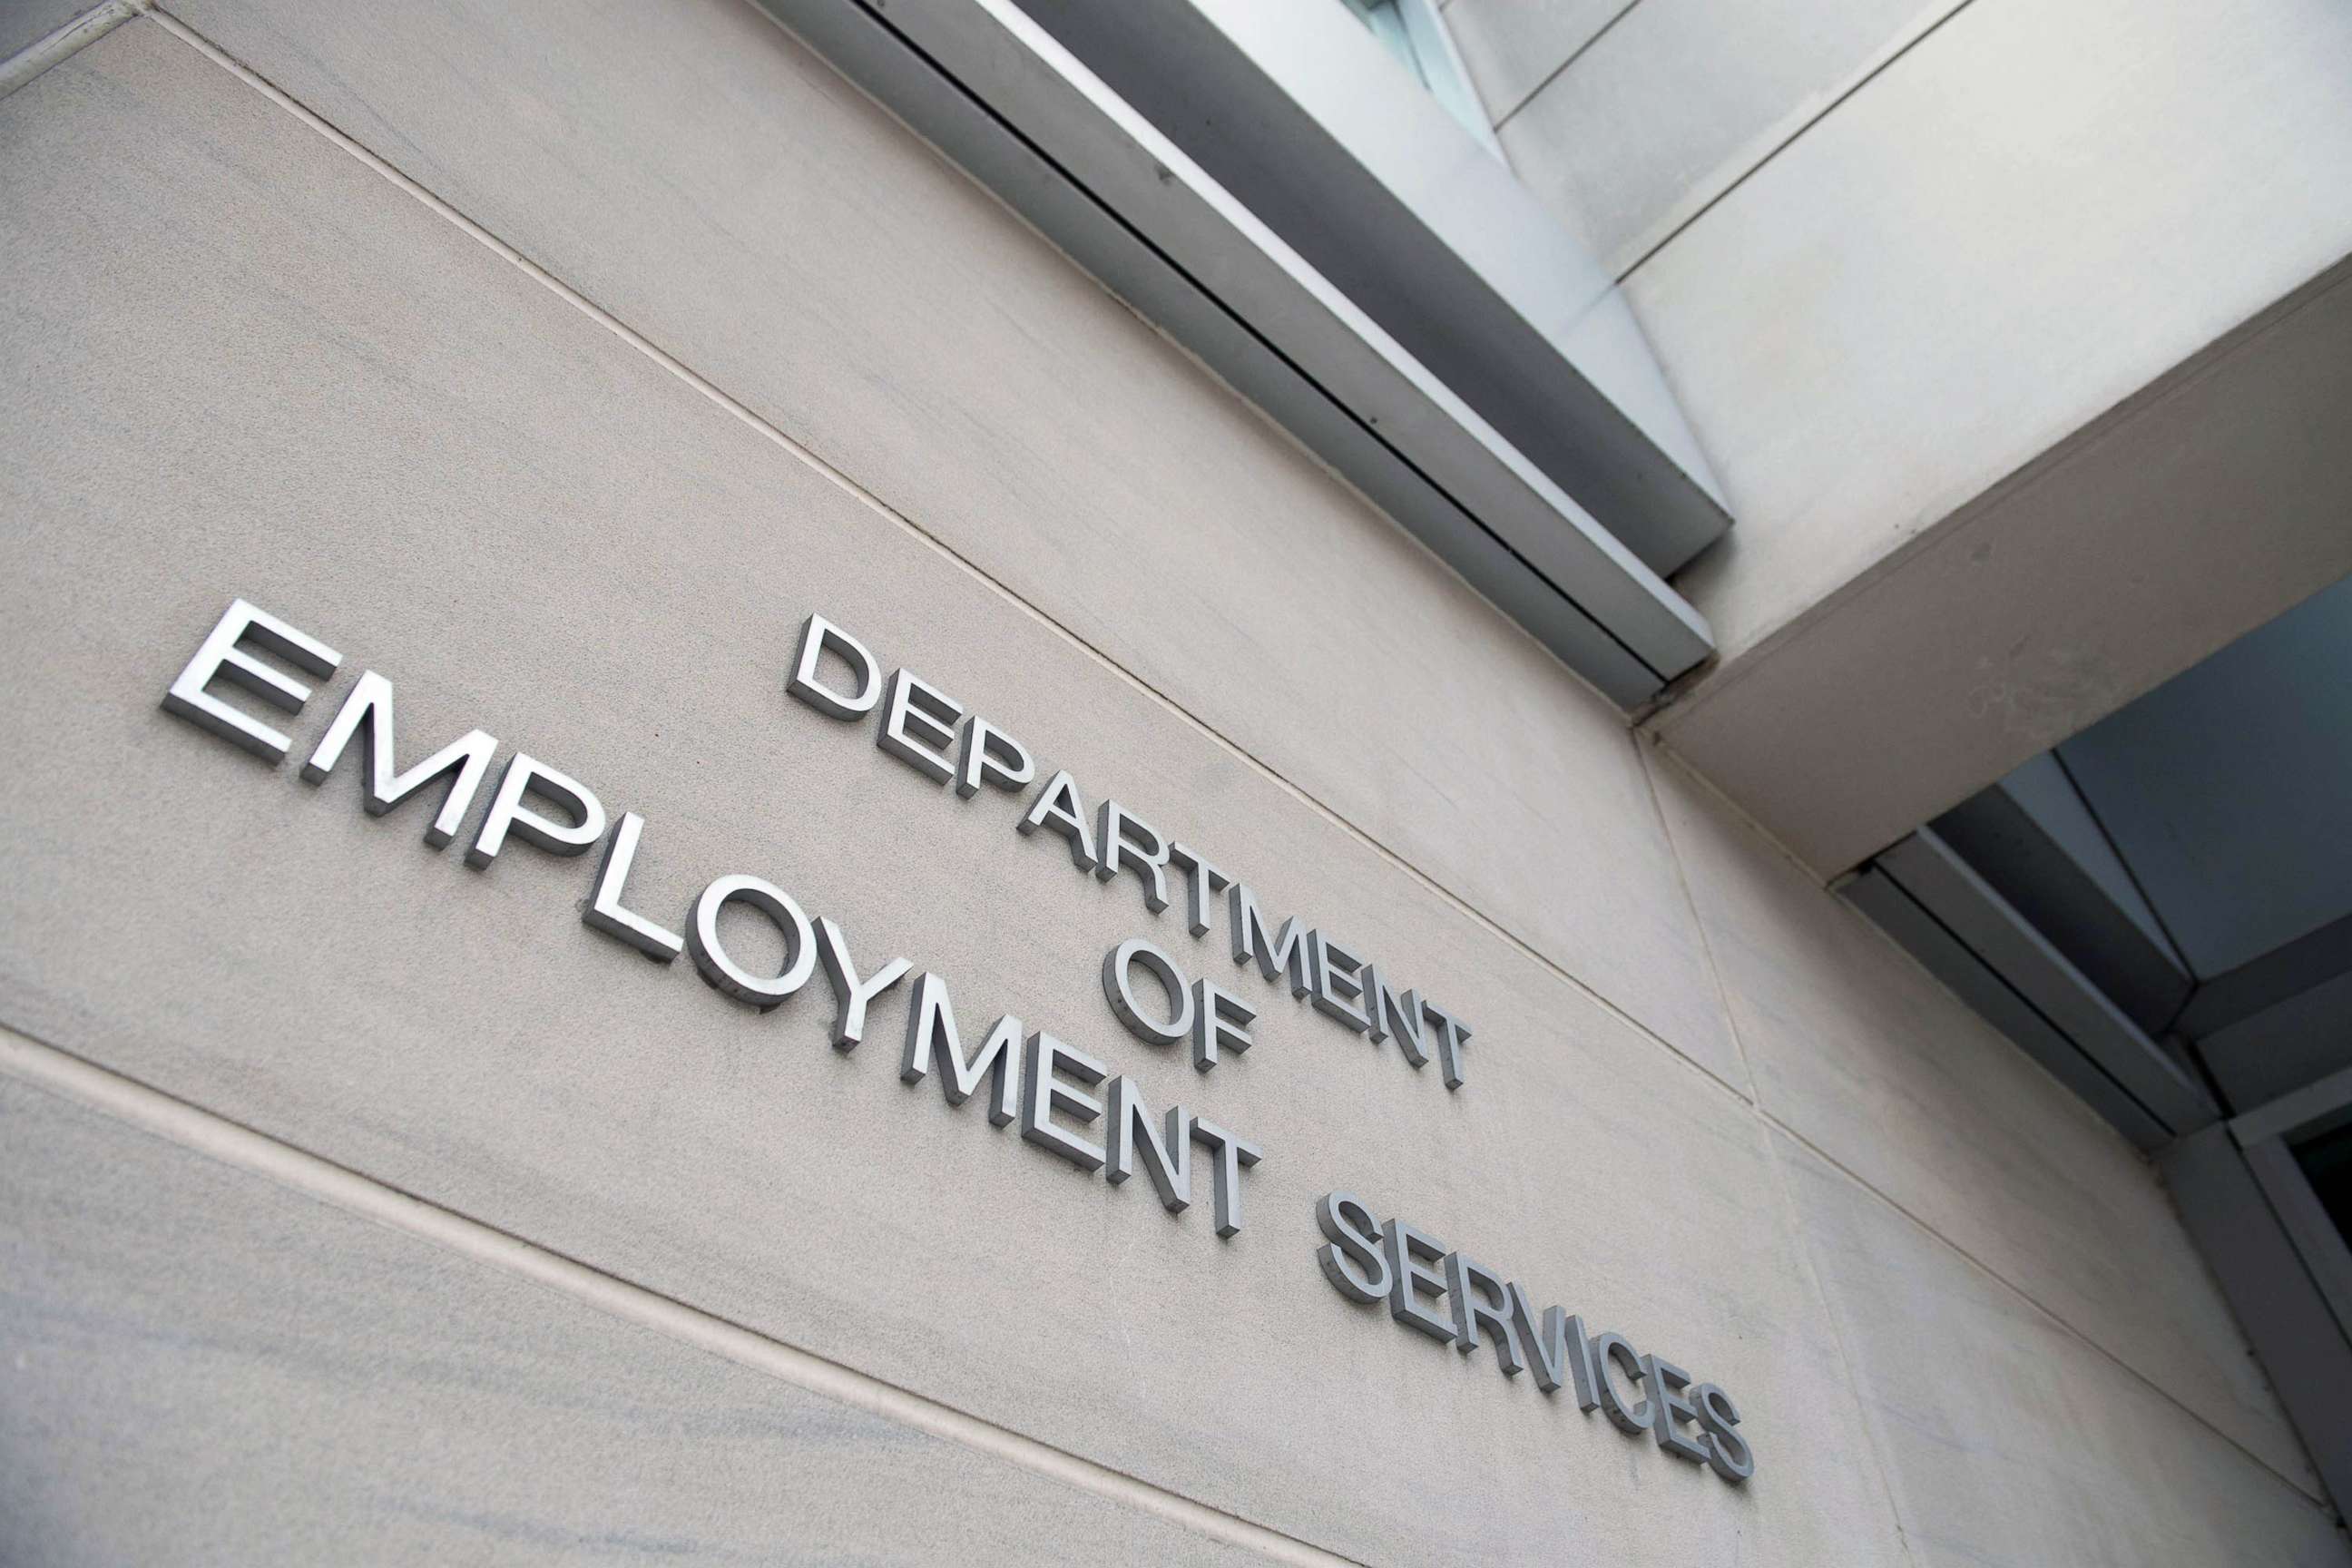 PHOTO: The DC Department of Employment Services, which handles unemployment claims for DC residents, is seen in Washington, D.C, July 16, 2020.